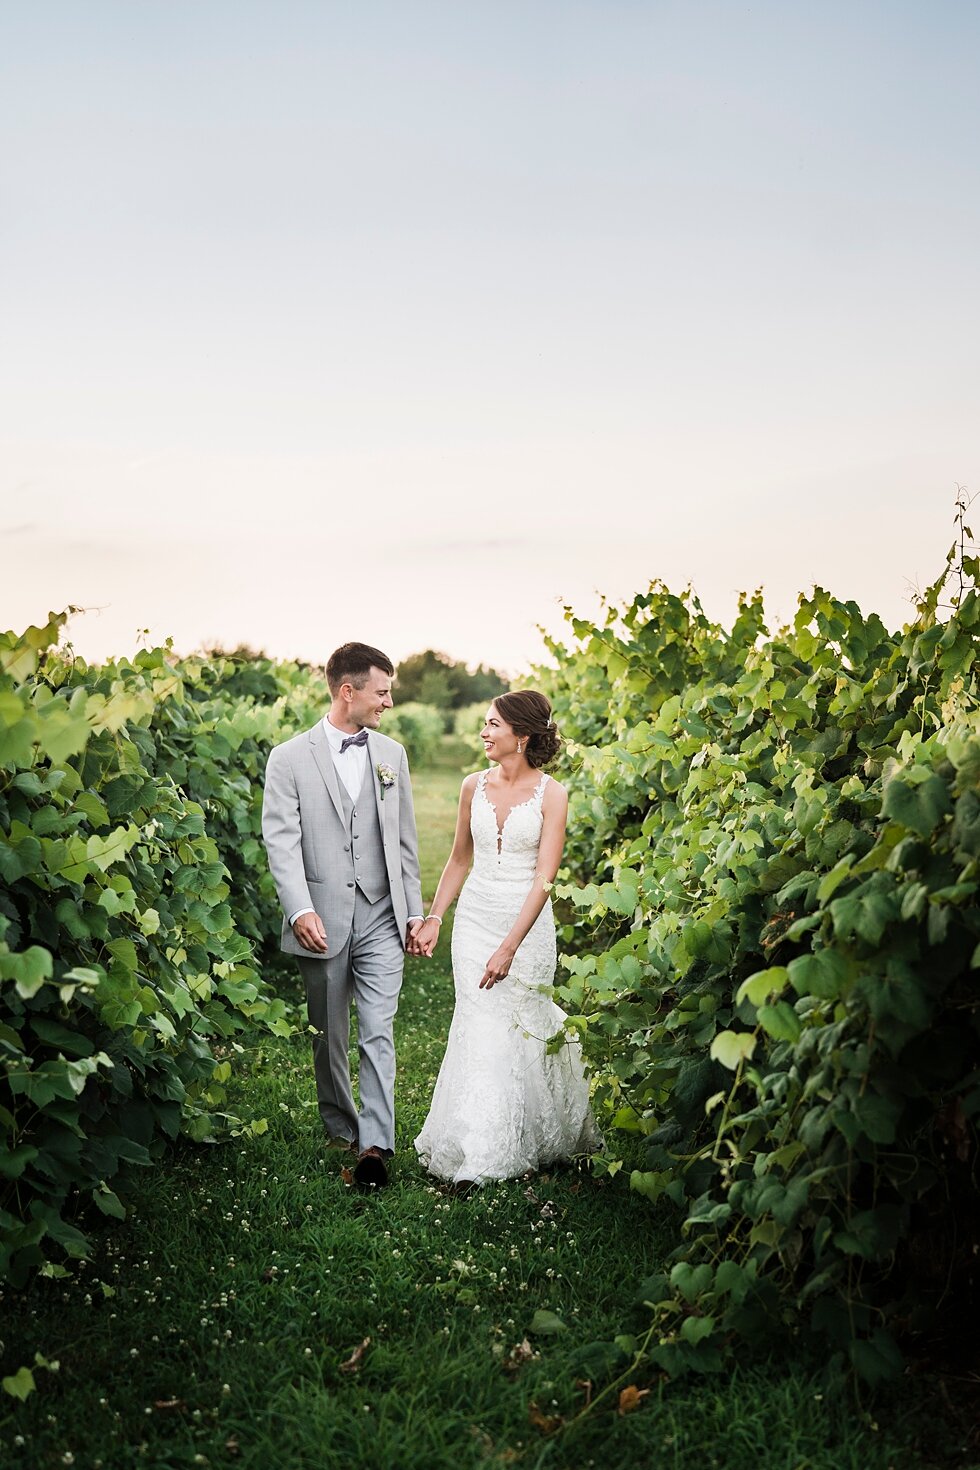  Bride and groom walking together in a wine orchard as they gaze into each others eyes. wedding ceremony details stunning photography married midwest louisville kentucky #weddingphoto #love #justmarried #midwestphotographer #kywedding #louisville #ke